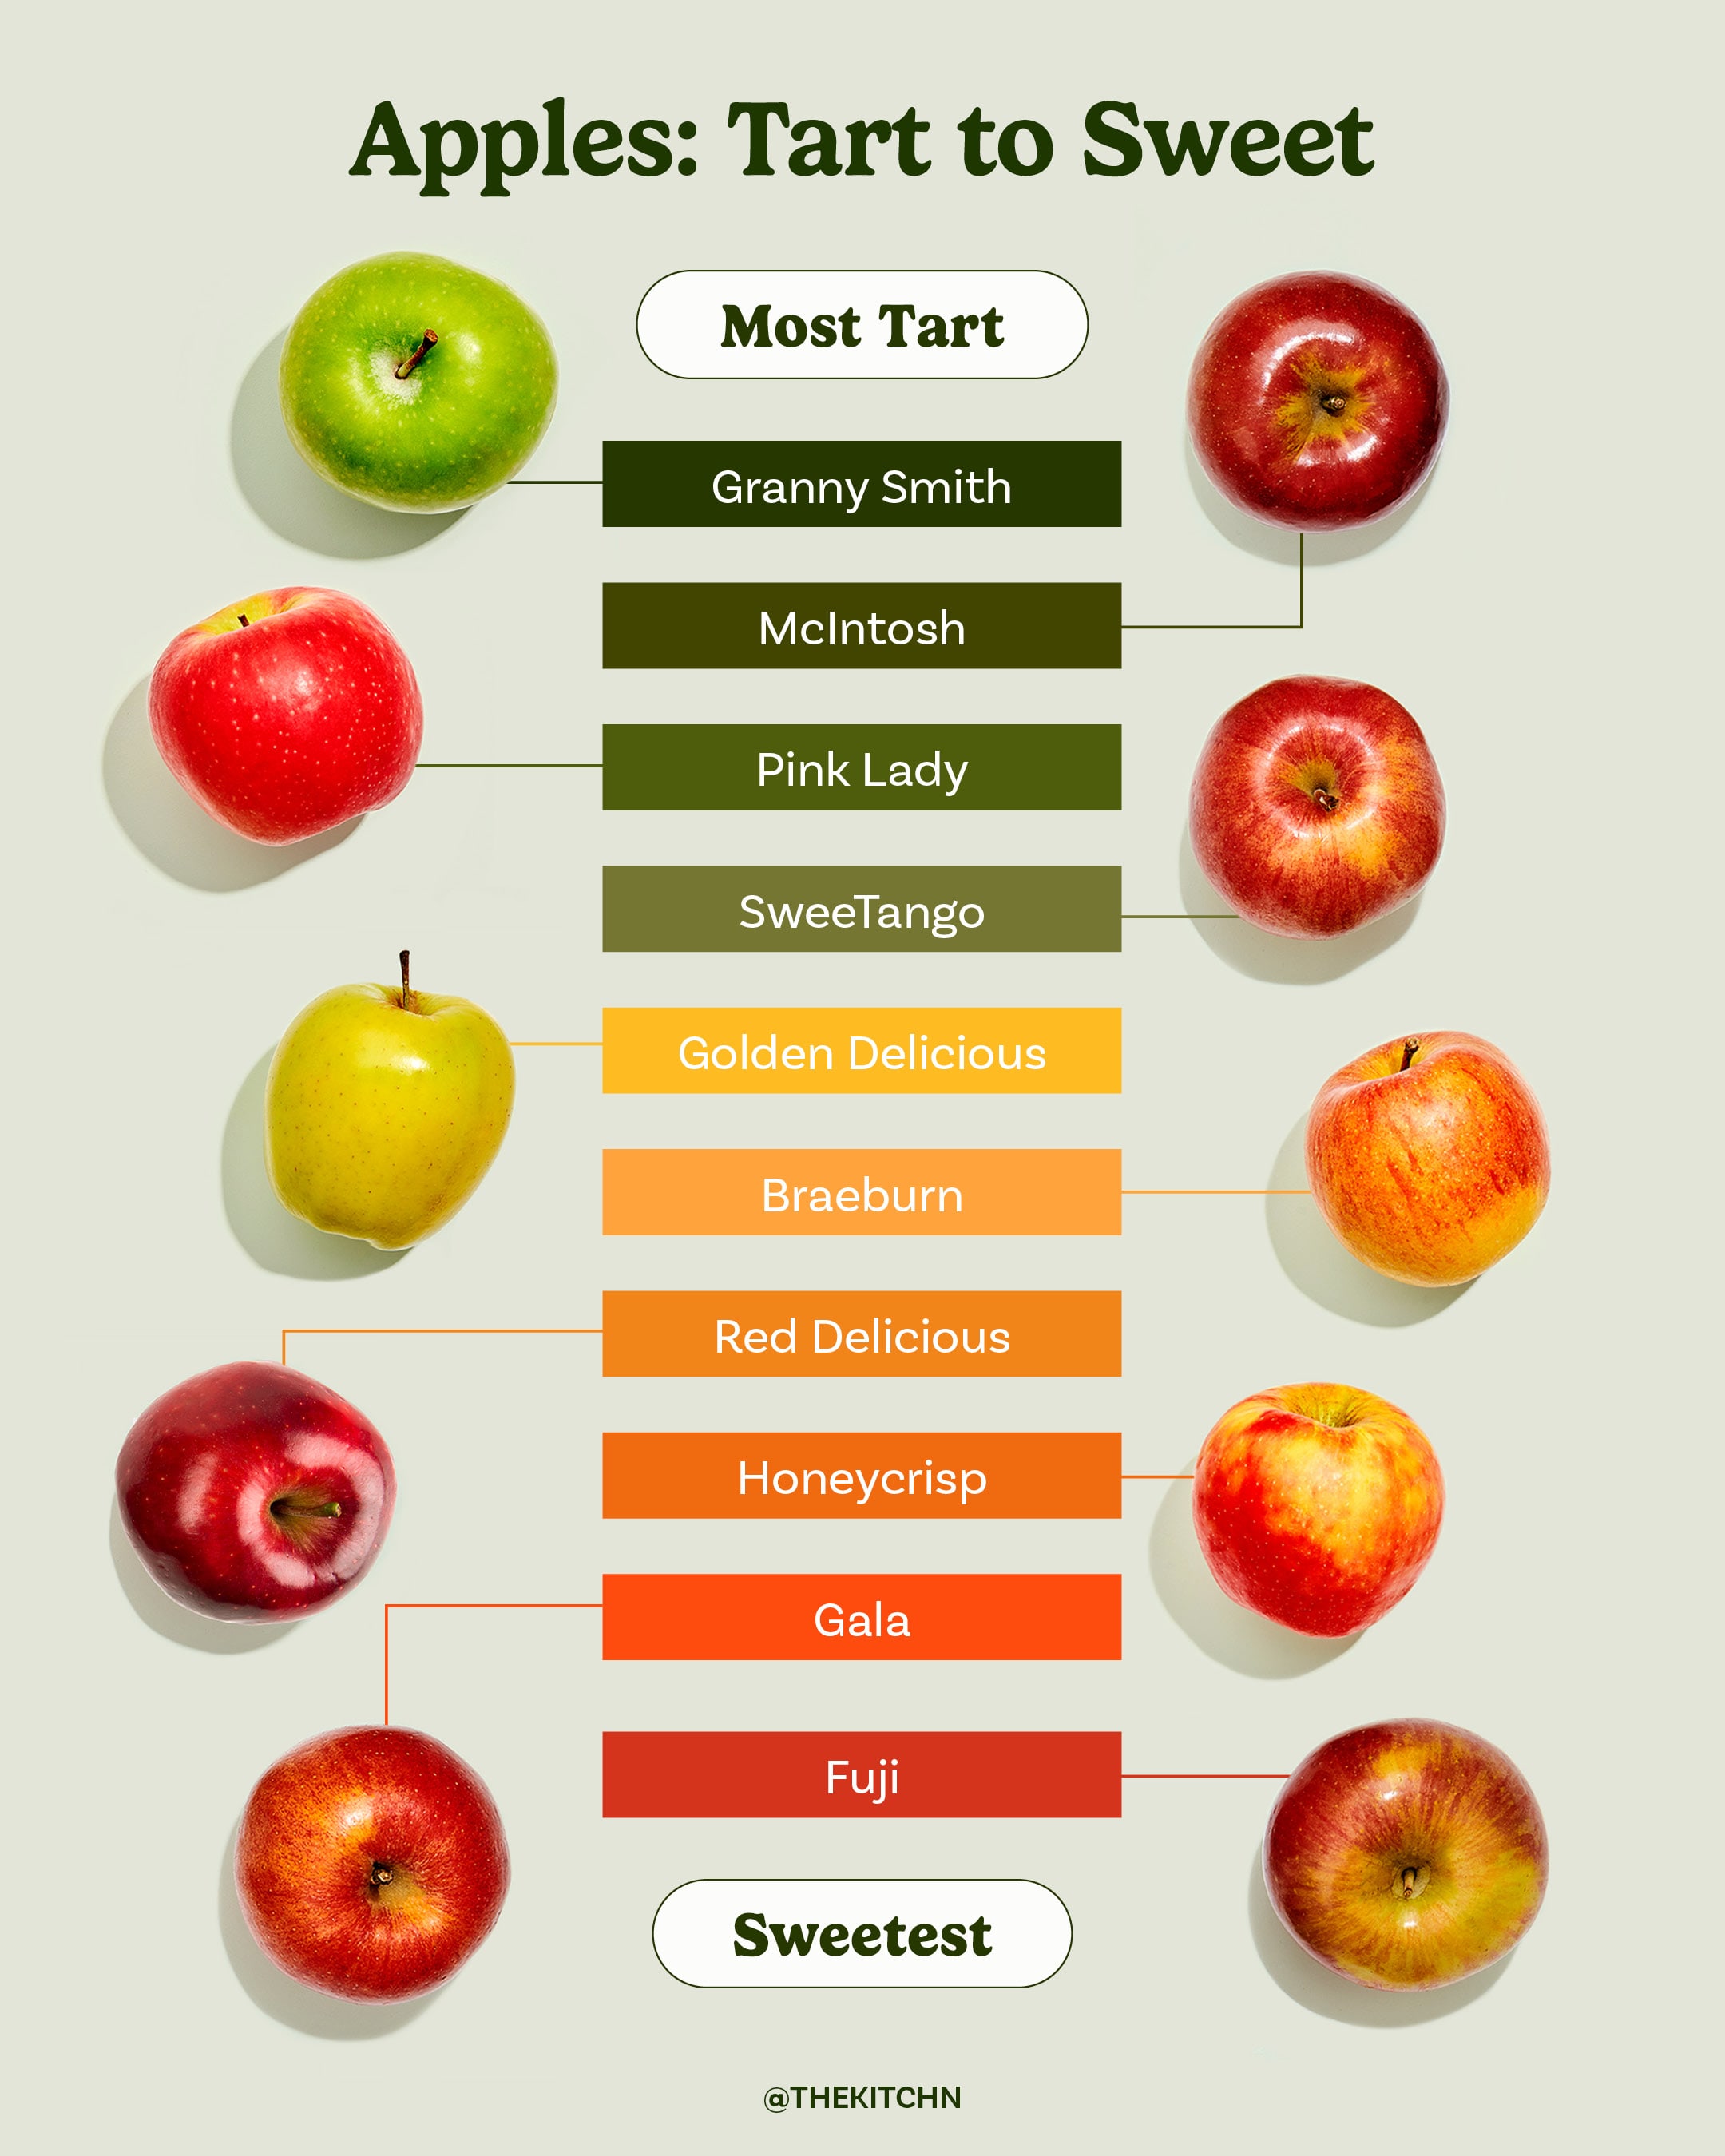 Red Granny Smith Apples Information and Facts